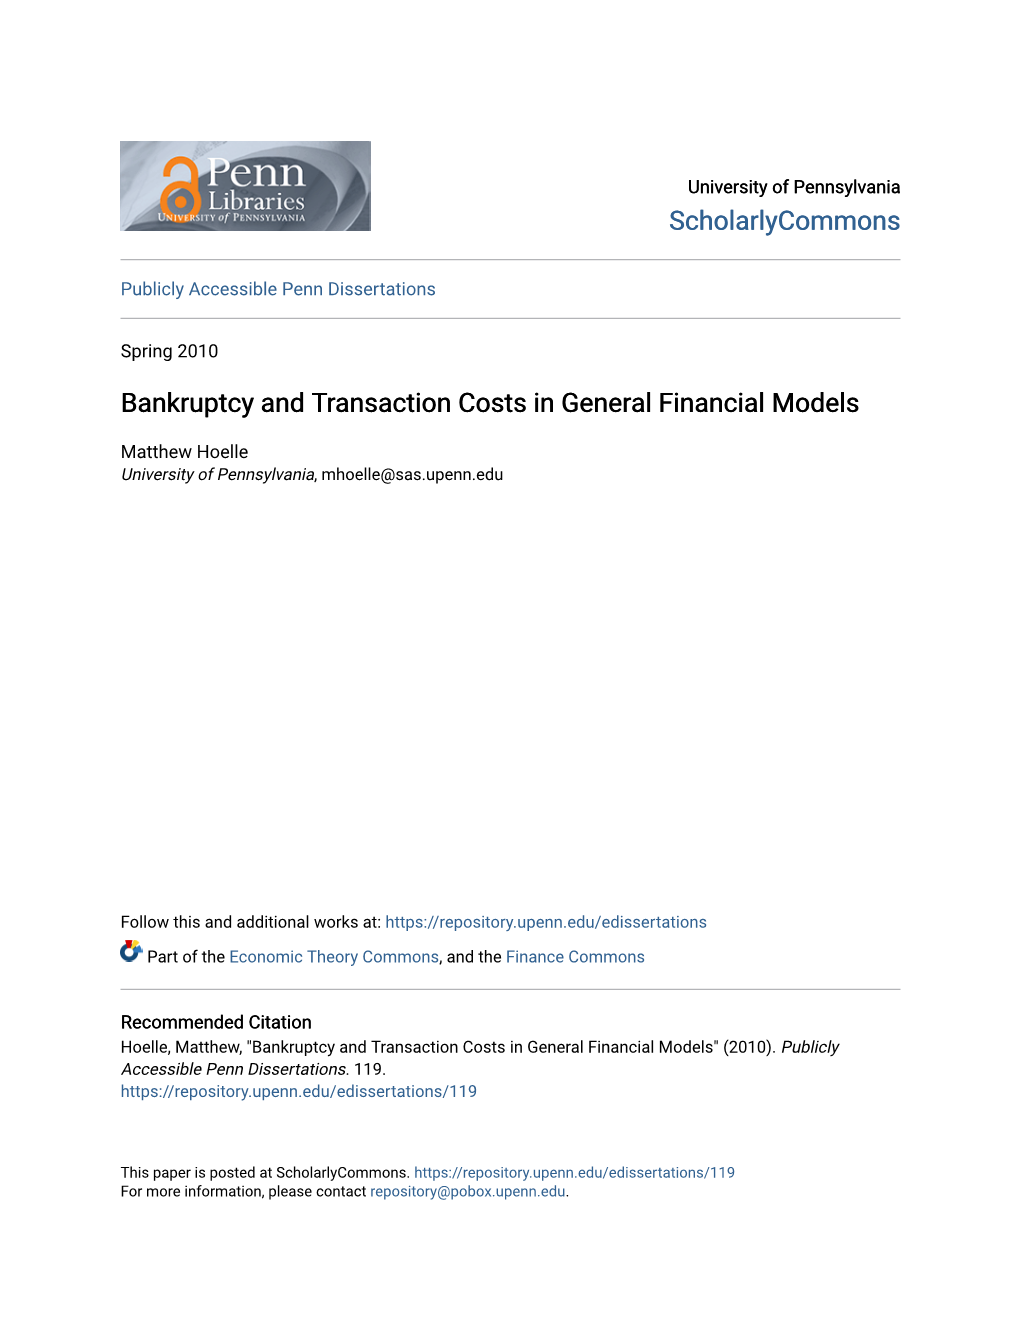 Bankruptcy and Transaction Costs in General Financial Models